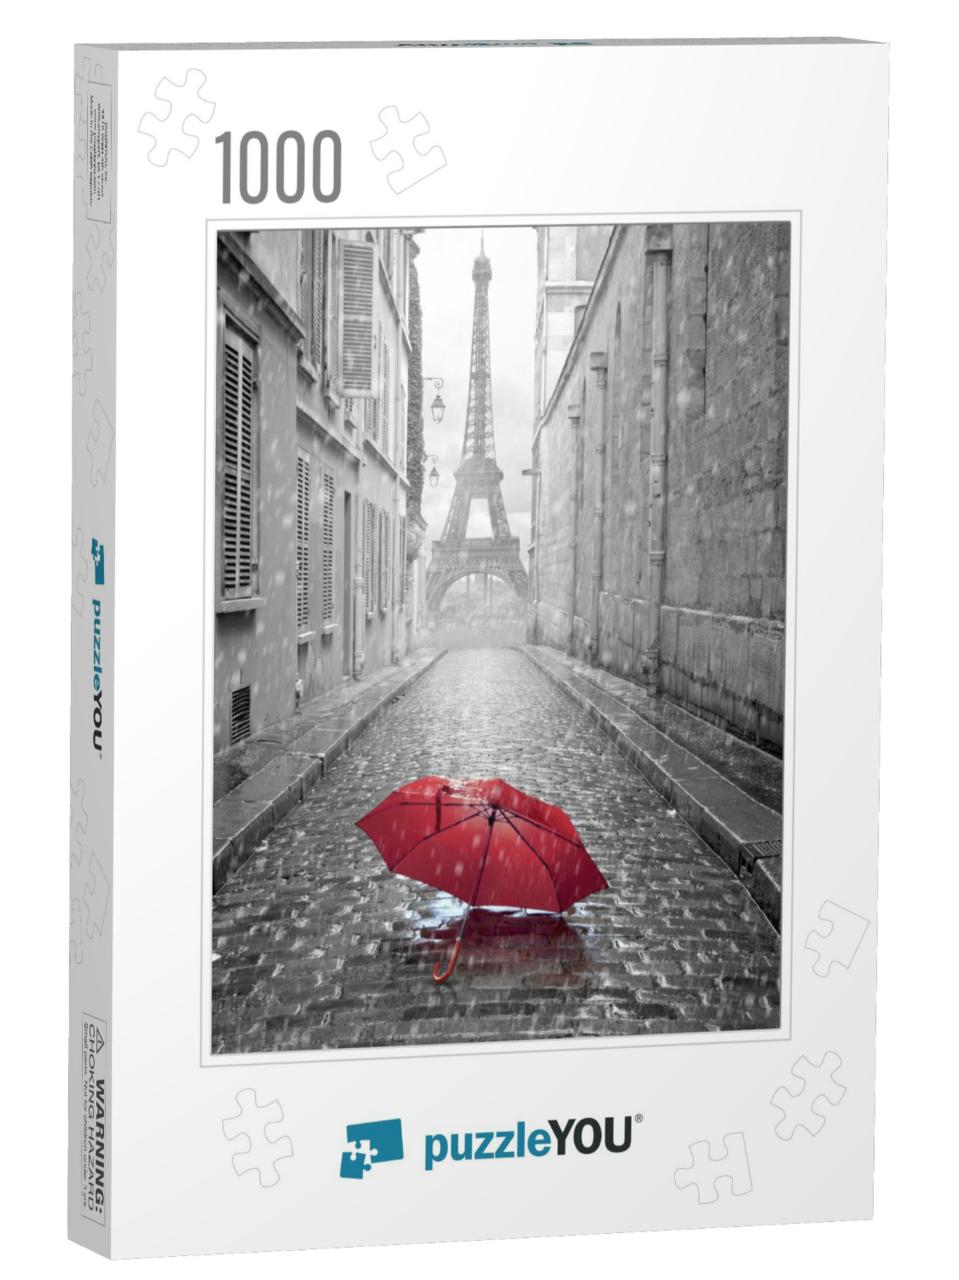 Eiffel Tower View from the Street of Paris. Black & White... Jigsaw Puzzle with 1000 pieces